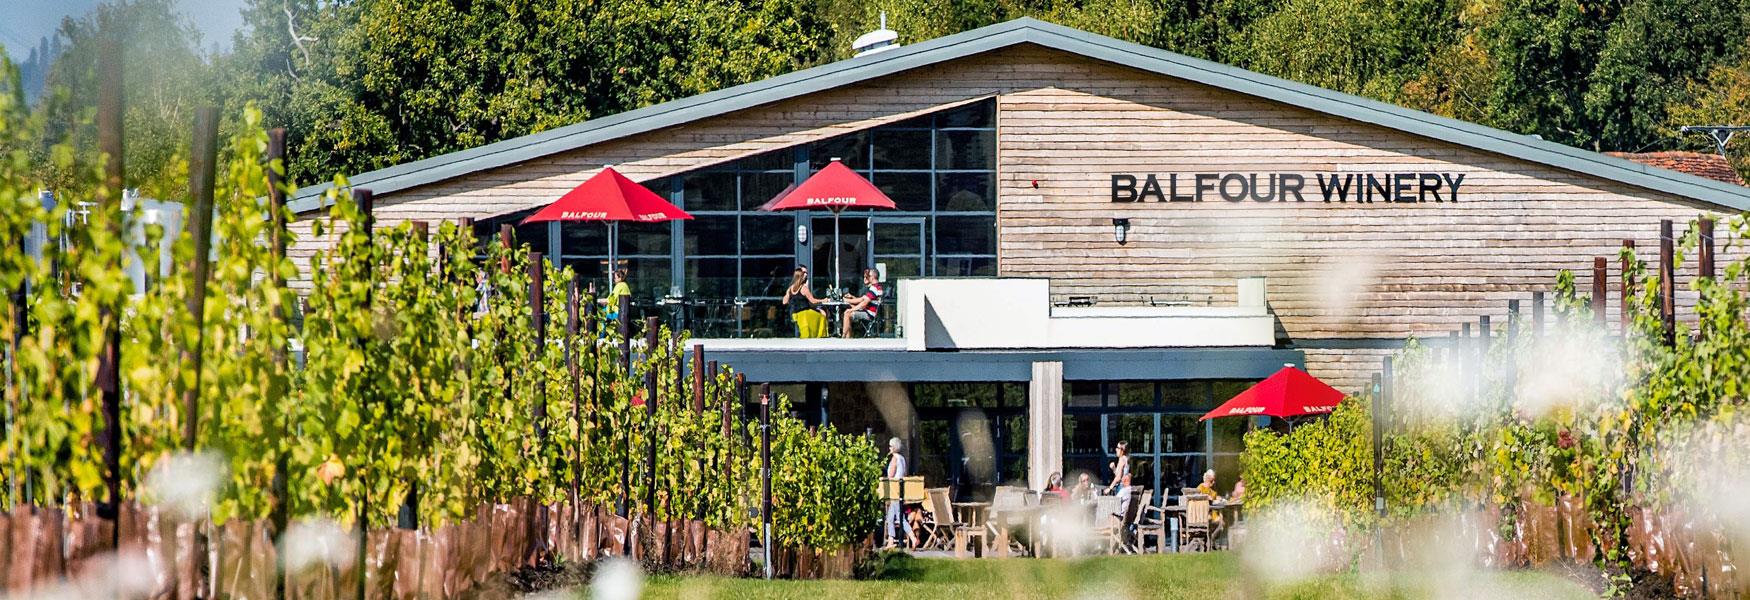 Balfour Winery set in a beautiful Kentish Valley, full of wild flowers and glorious wines to taste. Sit on the deck and enjoy, go on the tutored tasting or simply walk around the estate.